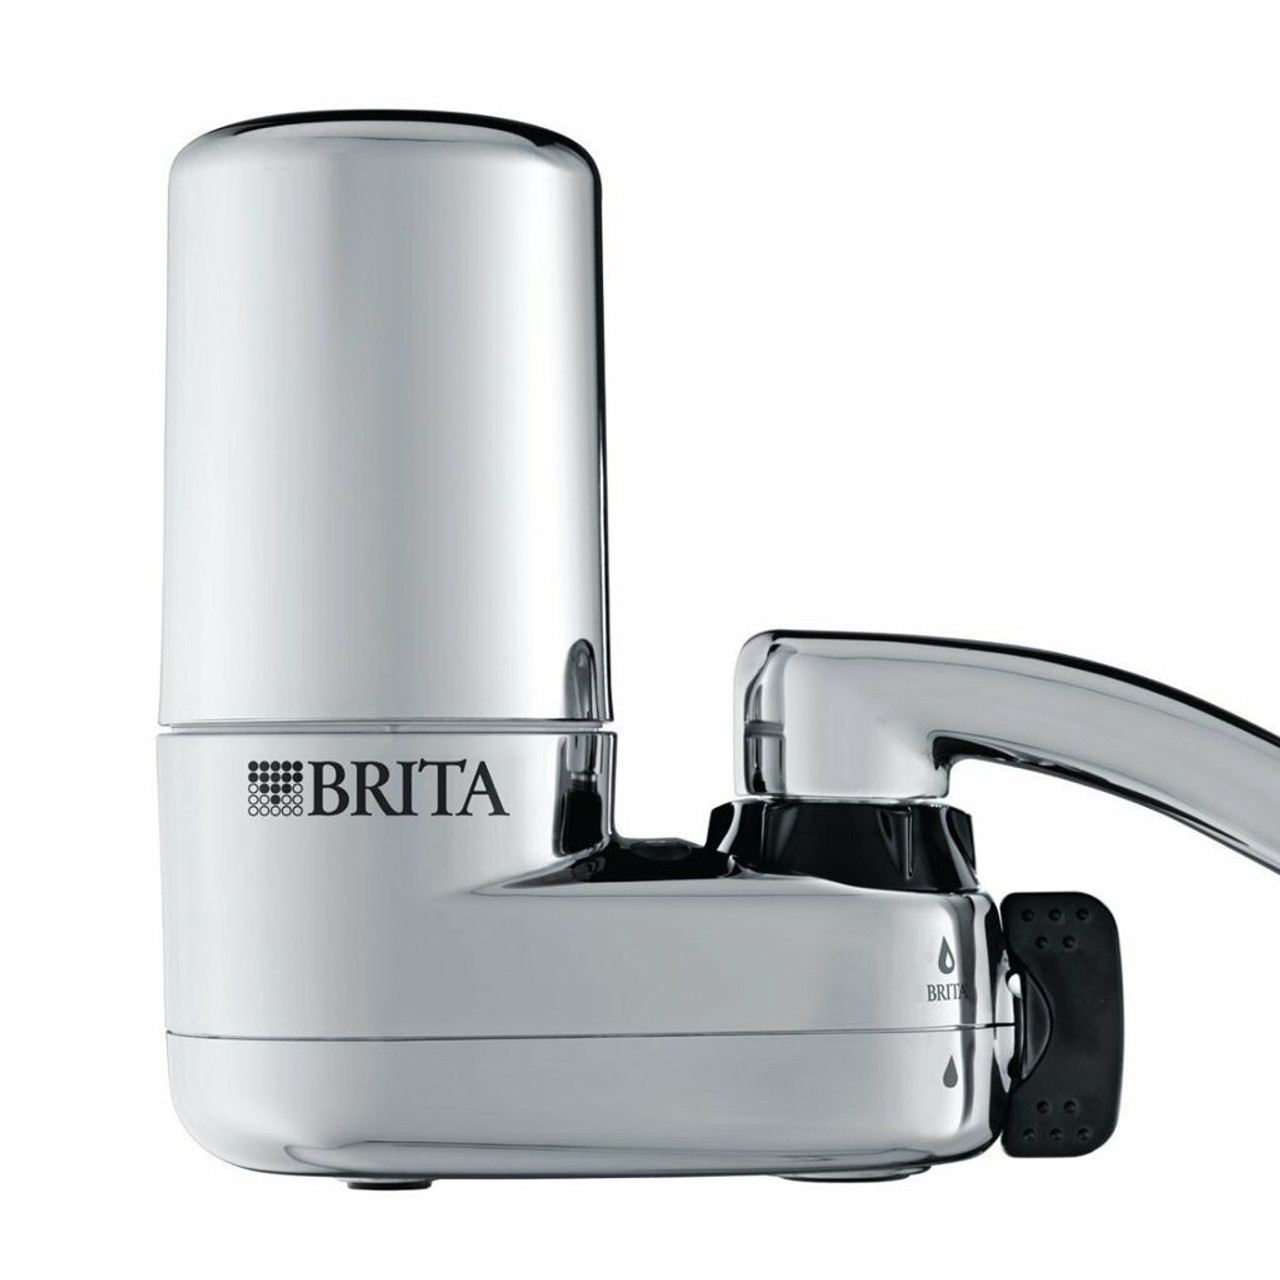 Brita Complete Water Faucet Filtration System With Light Indicator - Faucet  - 100 gal Filter Life (Water Capacity) - 1 Each - White, Blue